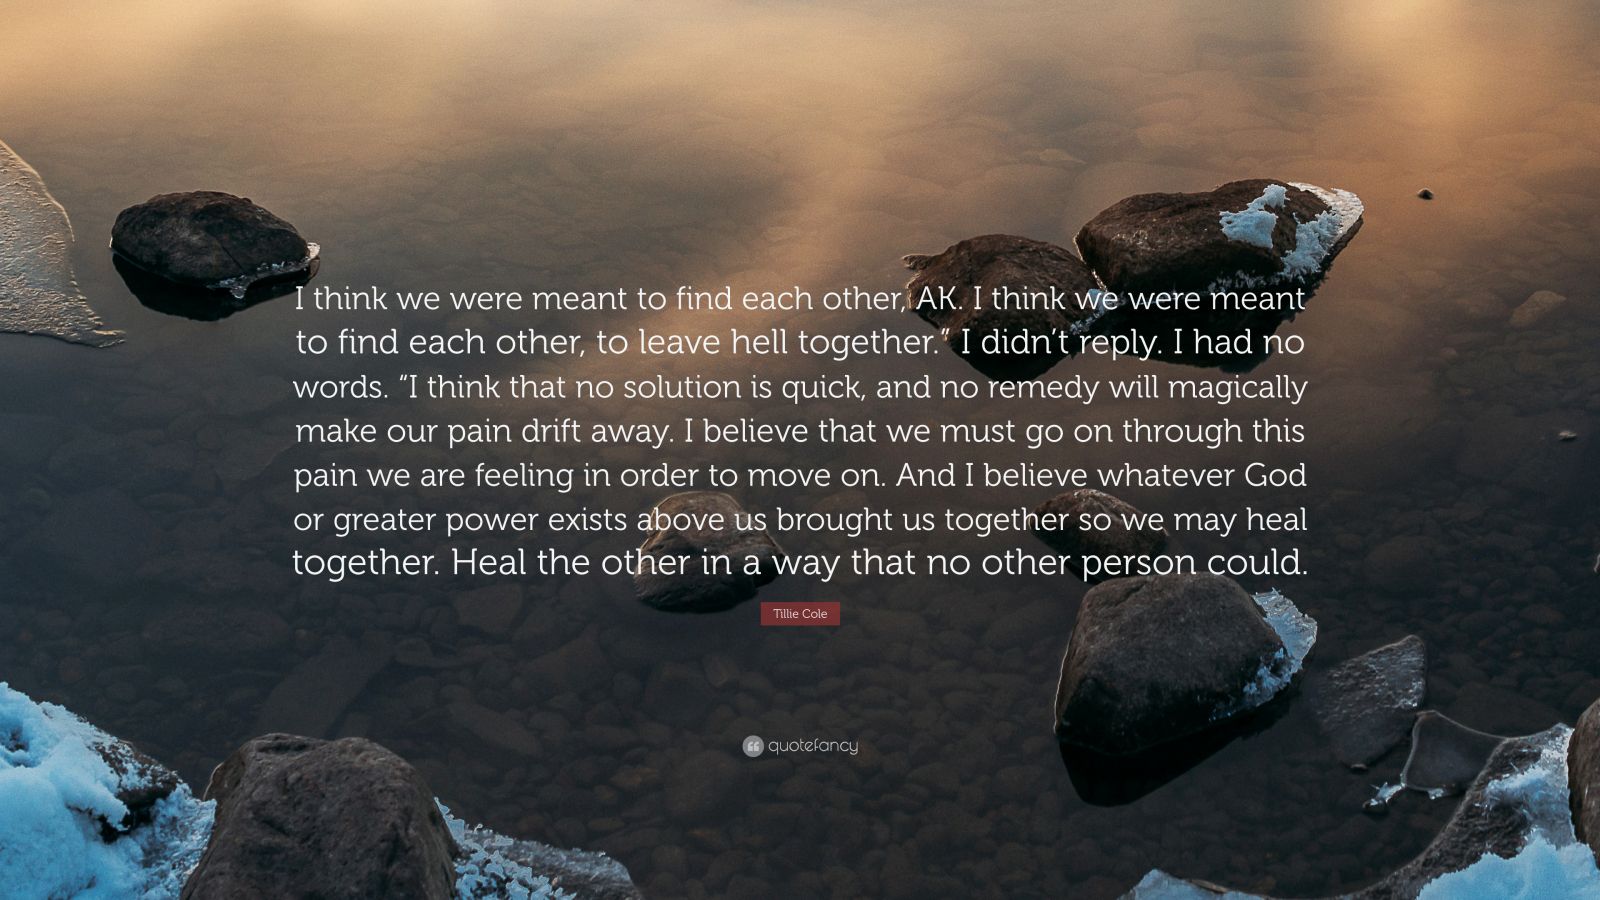 Tillie Cole Quote: “I think we were meant to find each other, AK. I ...